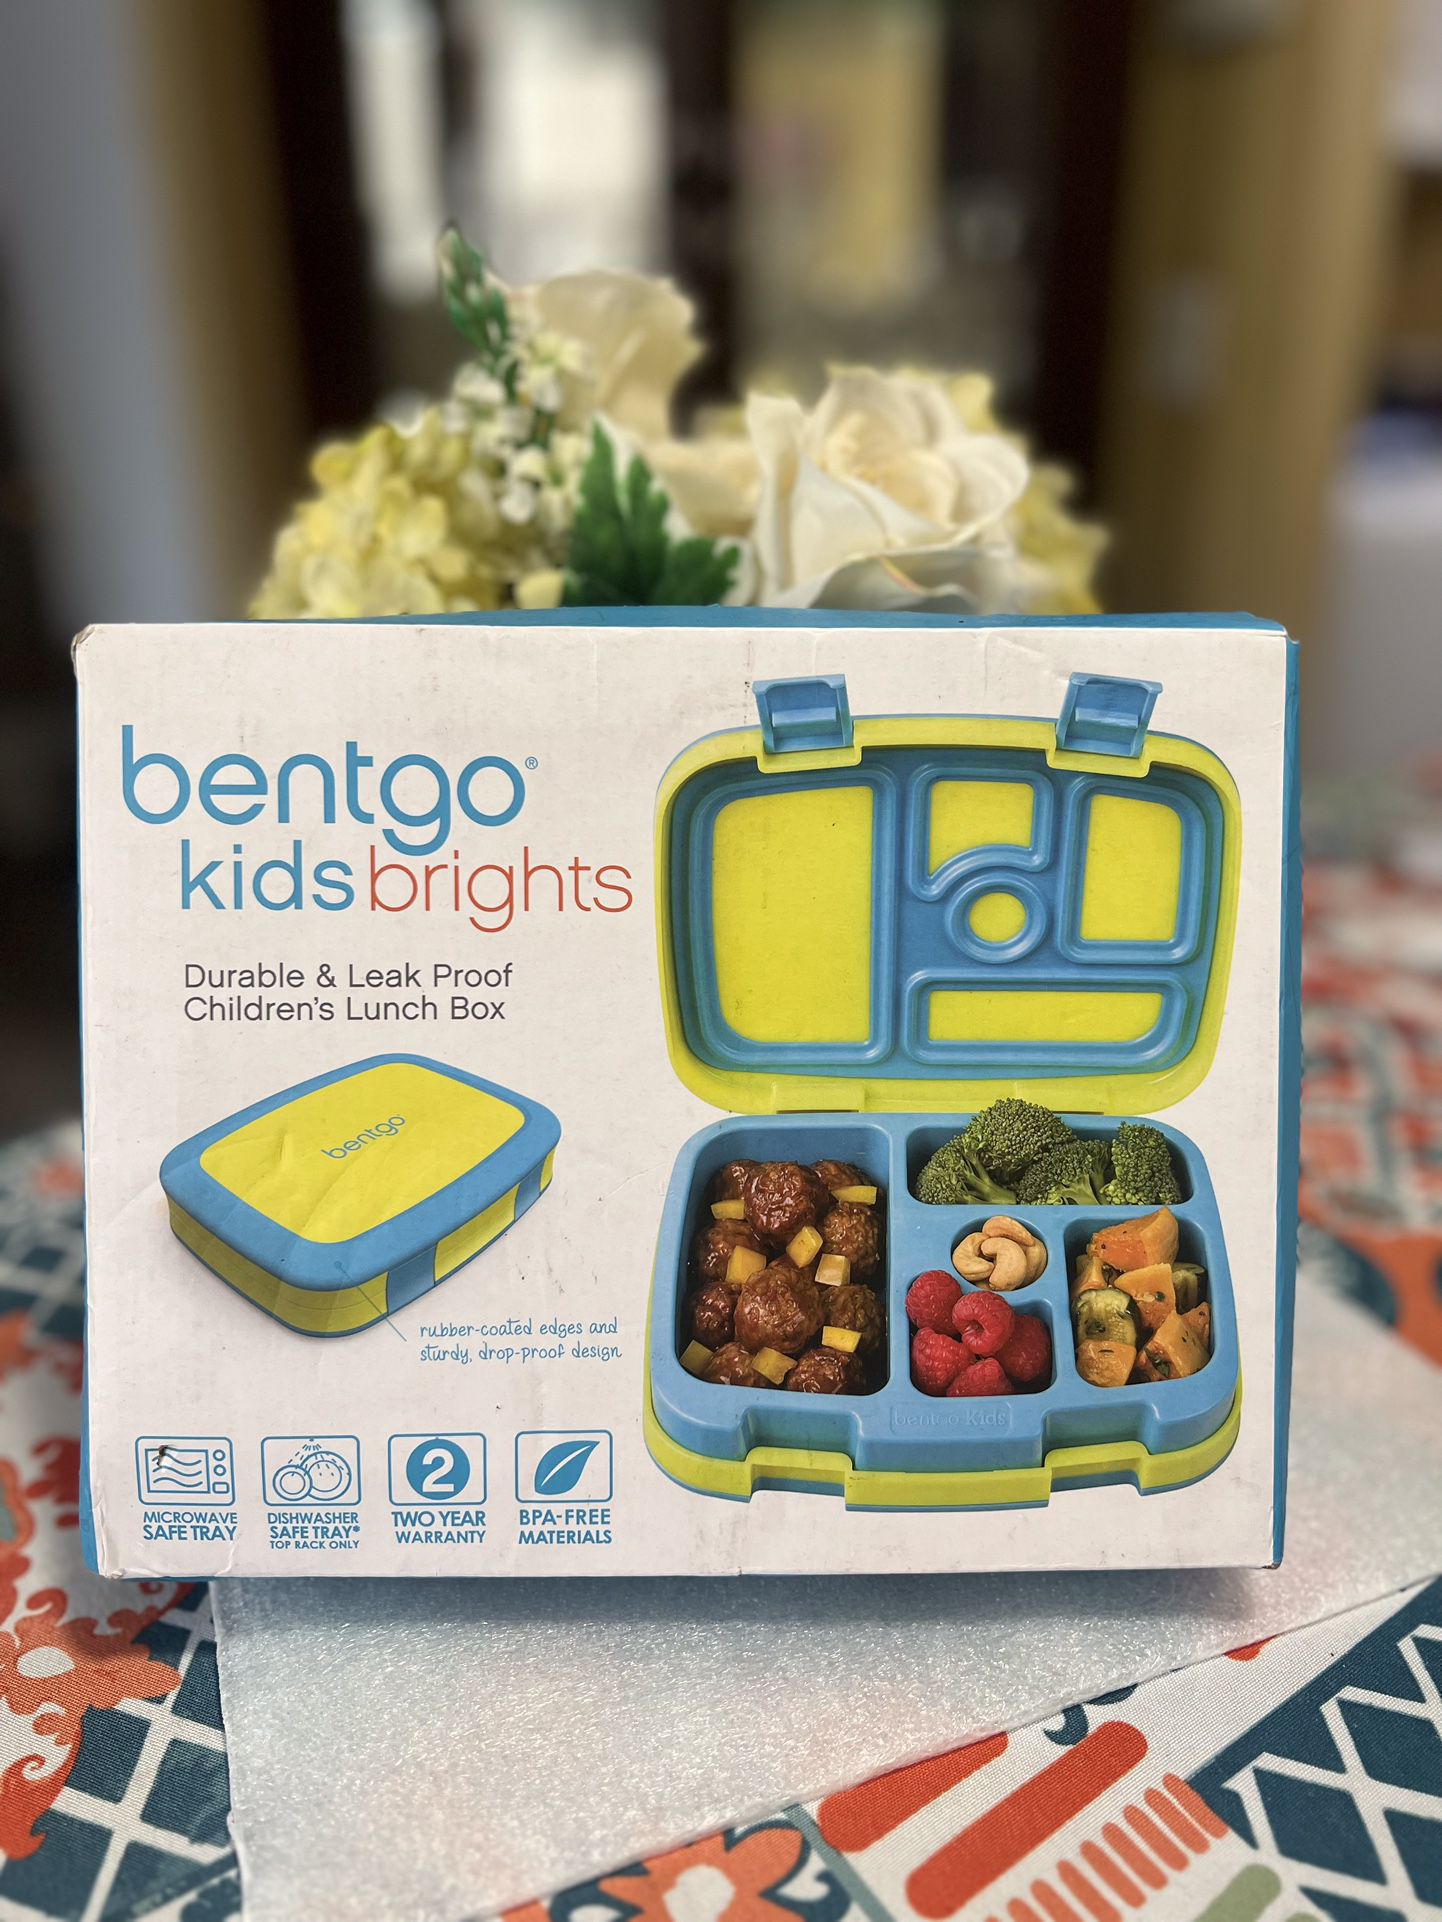 Bentgo Kids Brights Lunch Box Durable Leak Proof Food Container Blue/Yellow